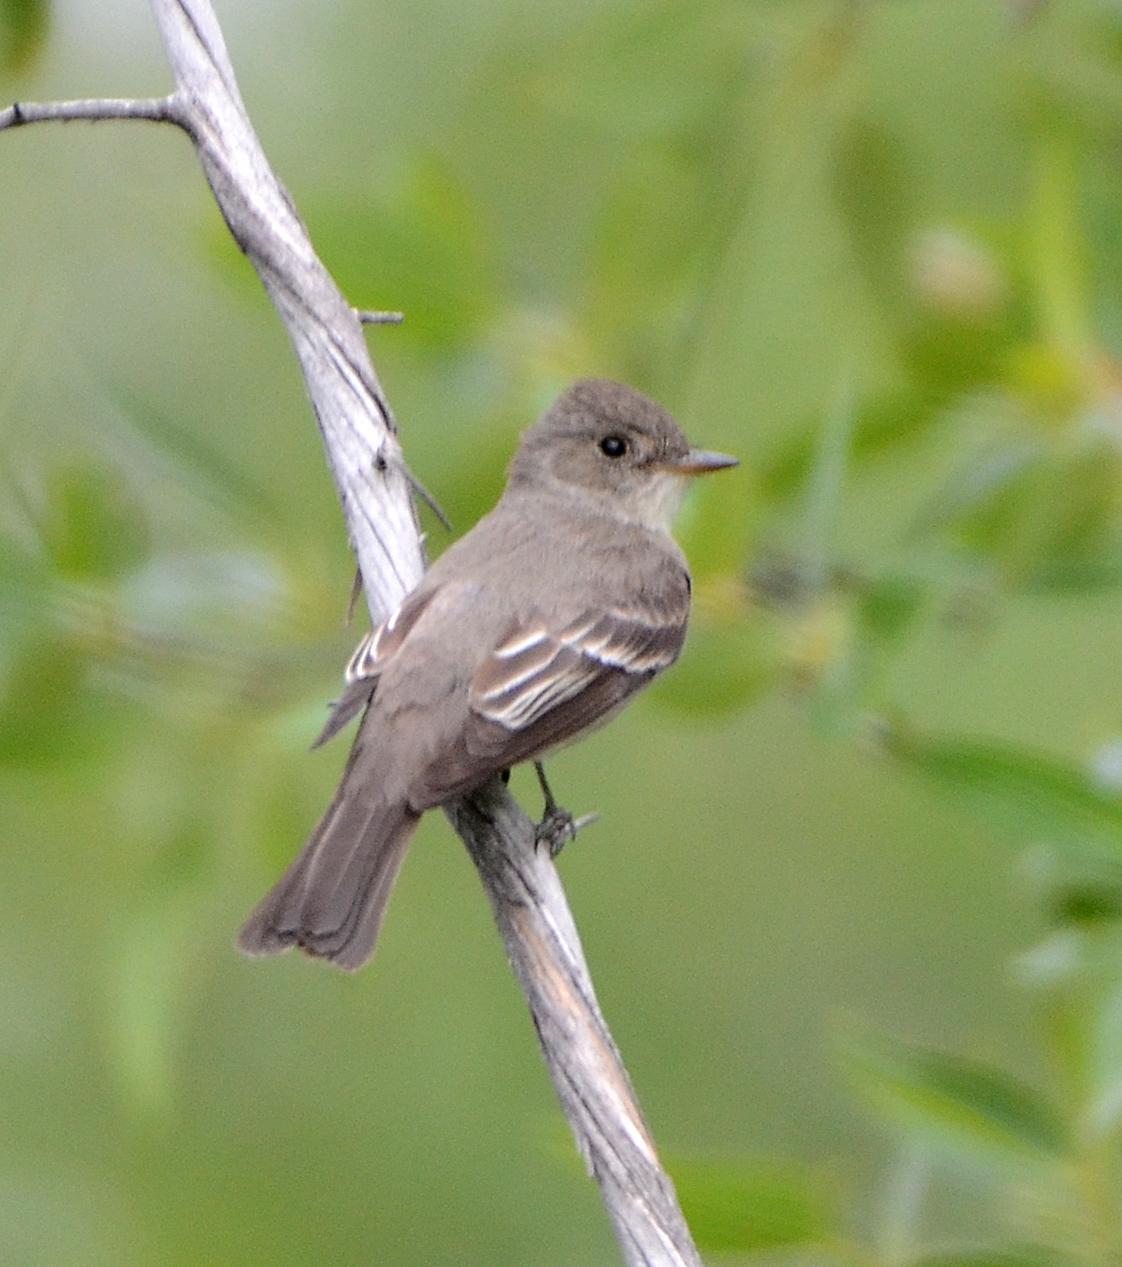 Western Wood-Pewee Photo by Steven Mlodinow